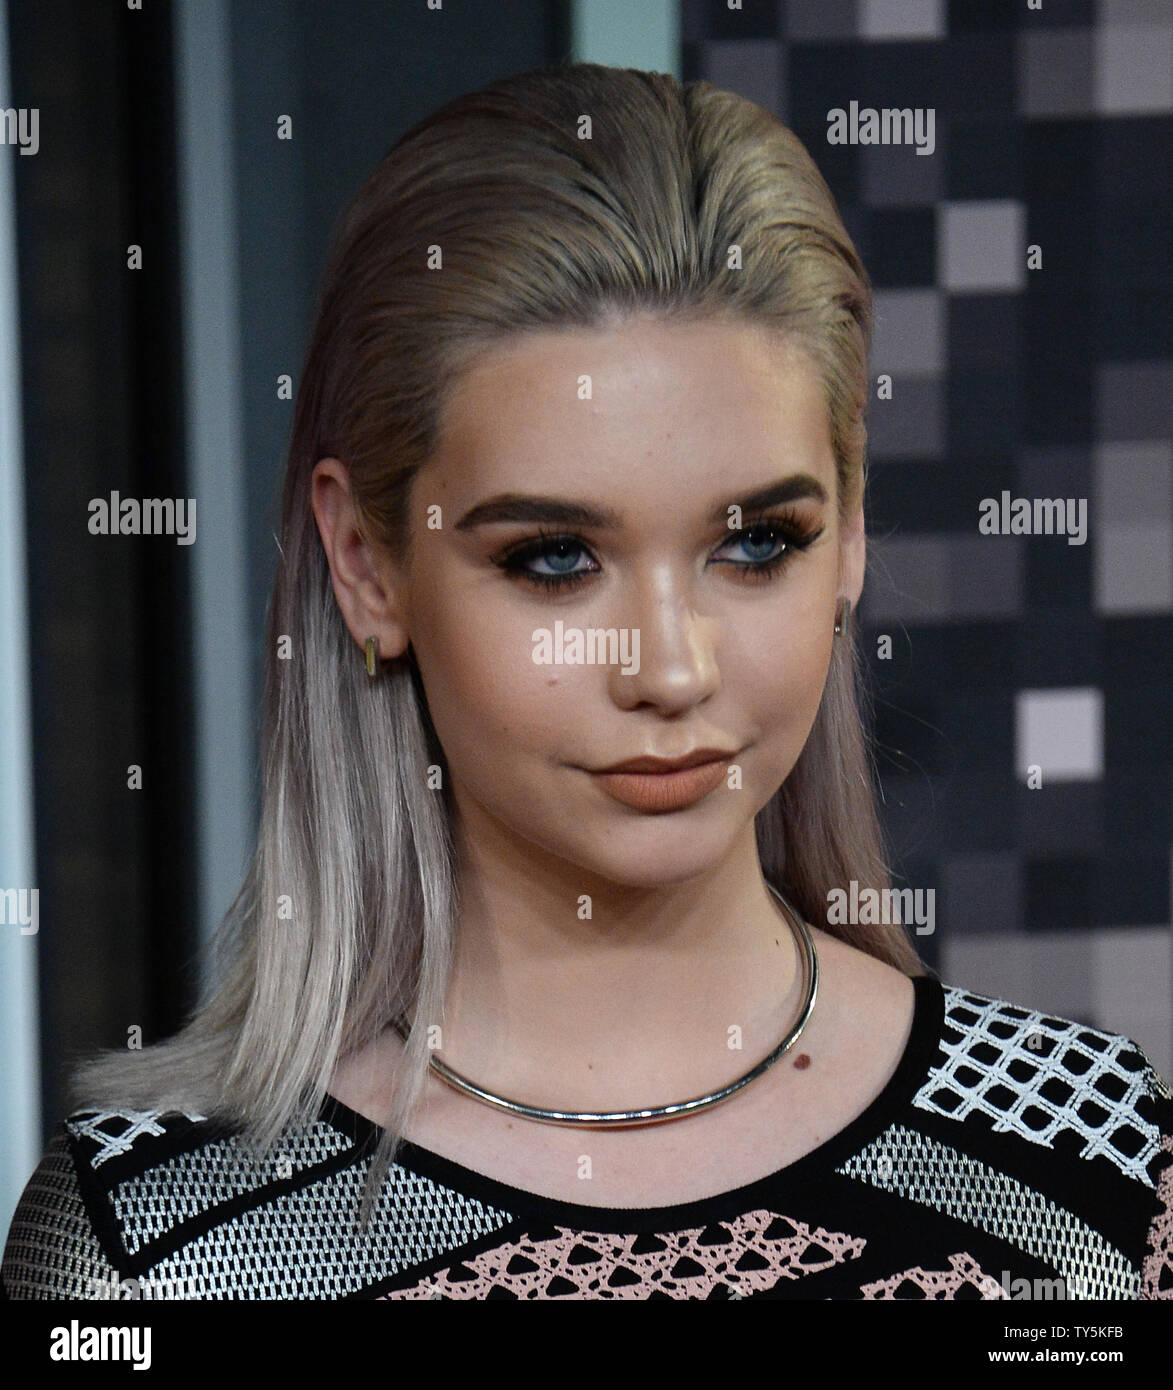 Internet personality Amanda Steele arrives on the red carpet for the 32nd  annual MTV Video Music